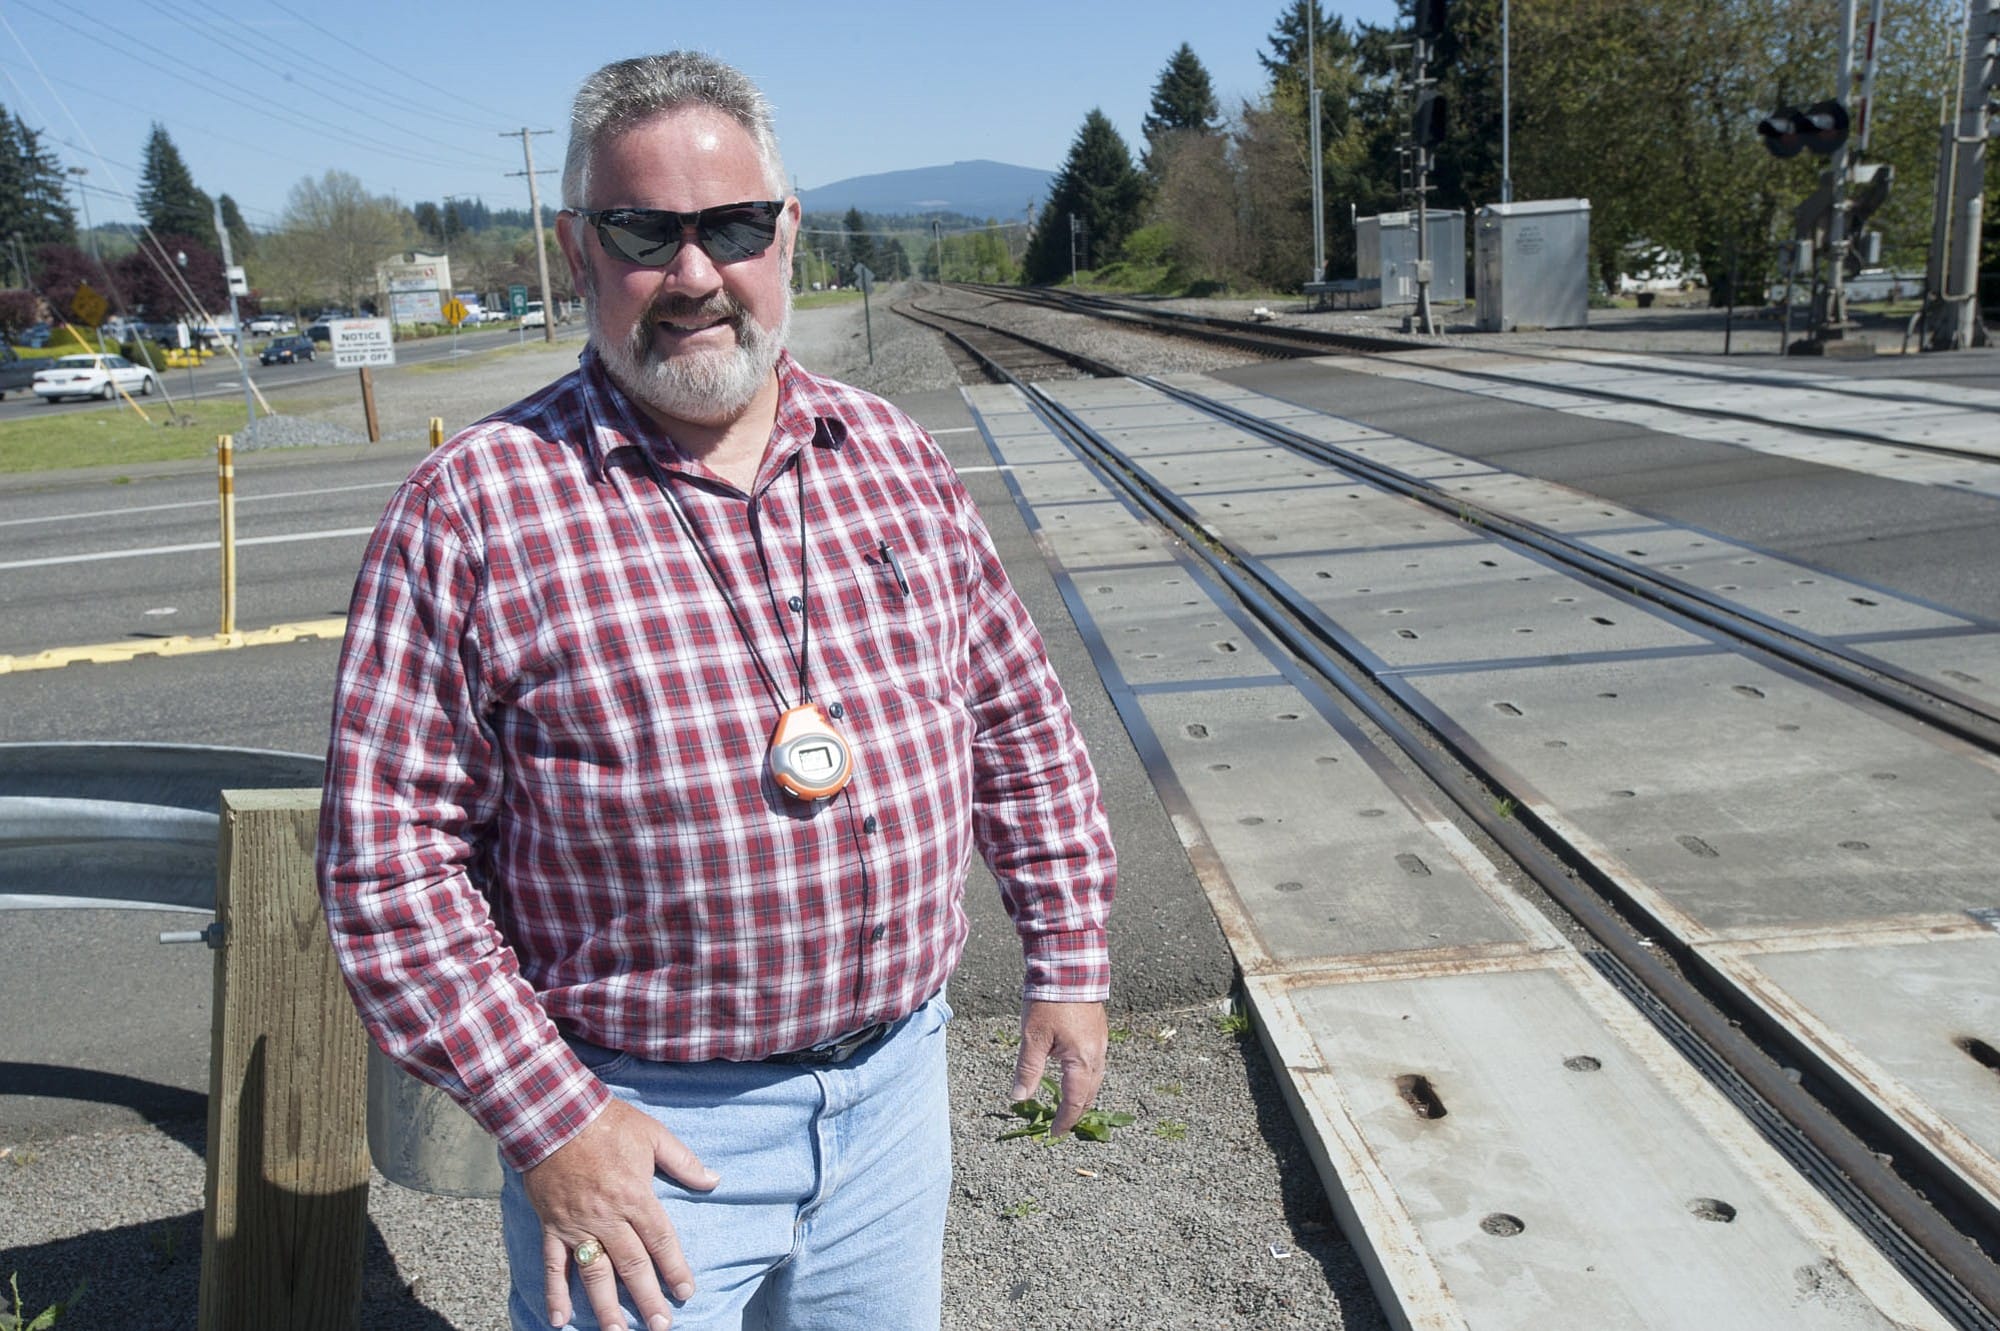 Washougal Mayor Sean Guard pauses at the railroad tracks, near his downtown Washougal campsite.